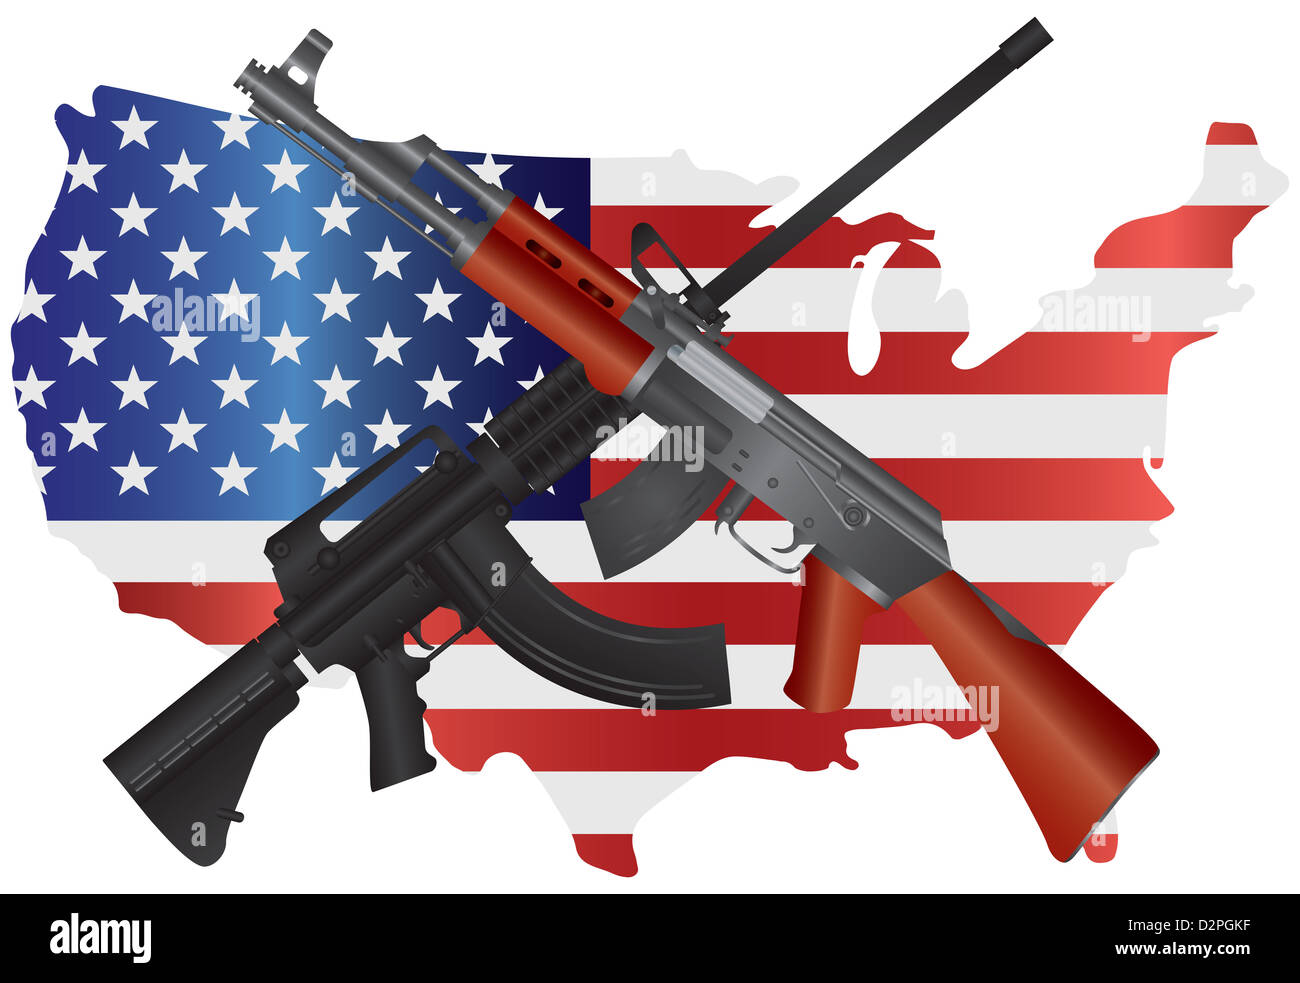 Assault Rifles AR 15 and AK 47 Semi Automatic Weapons on USA Map Flag Second Amendments Constitution Illustration Stock Photo